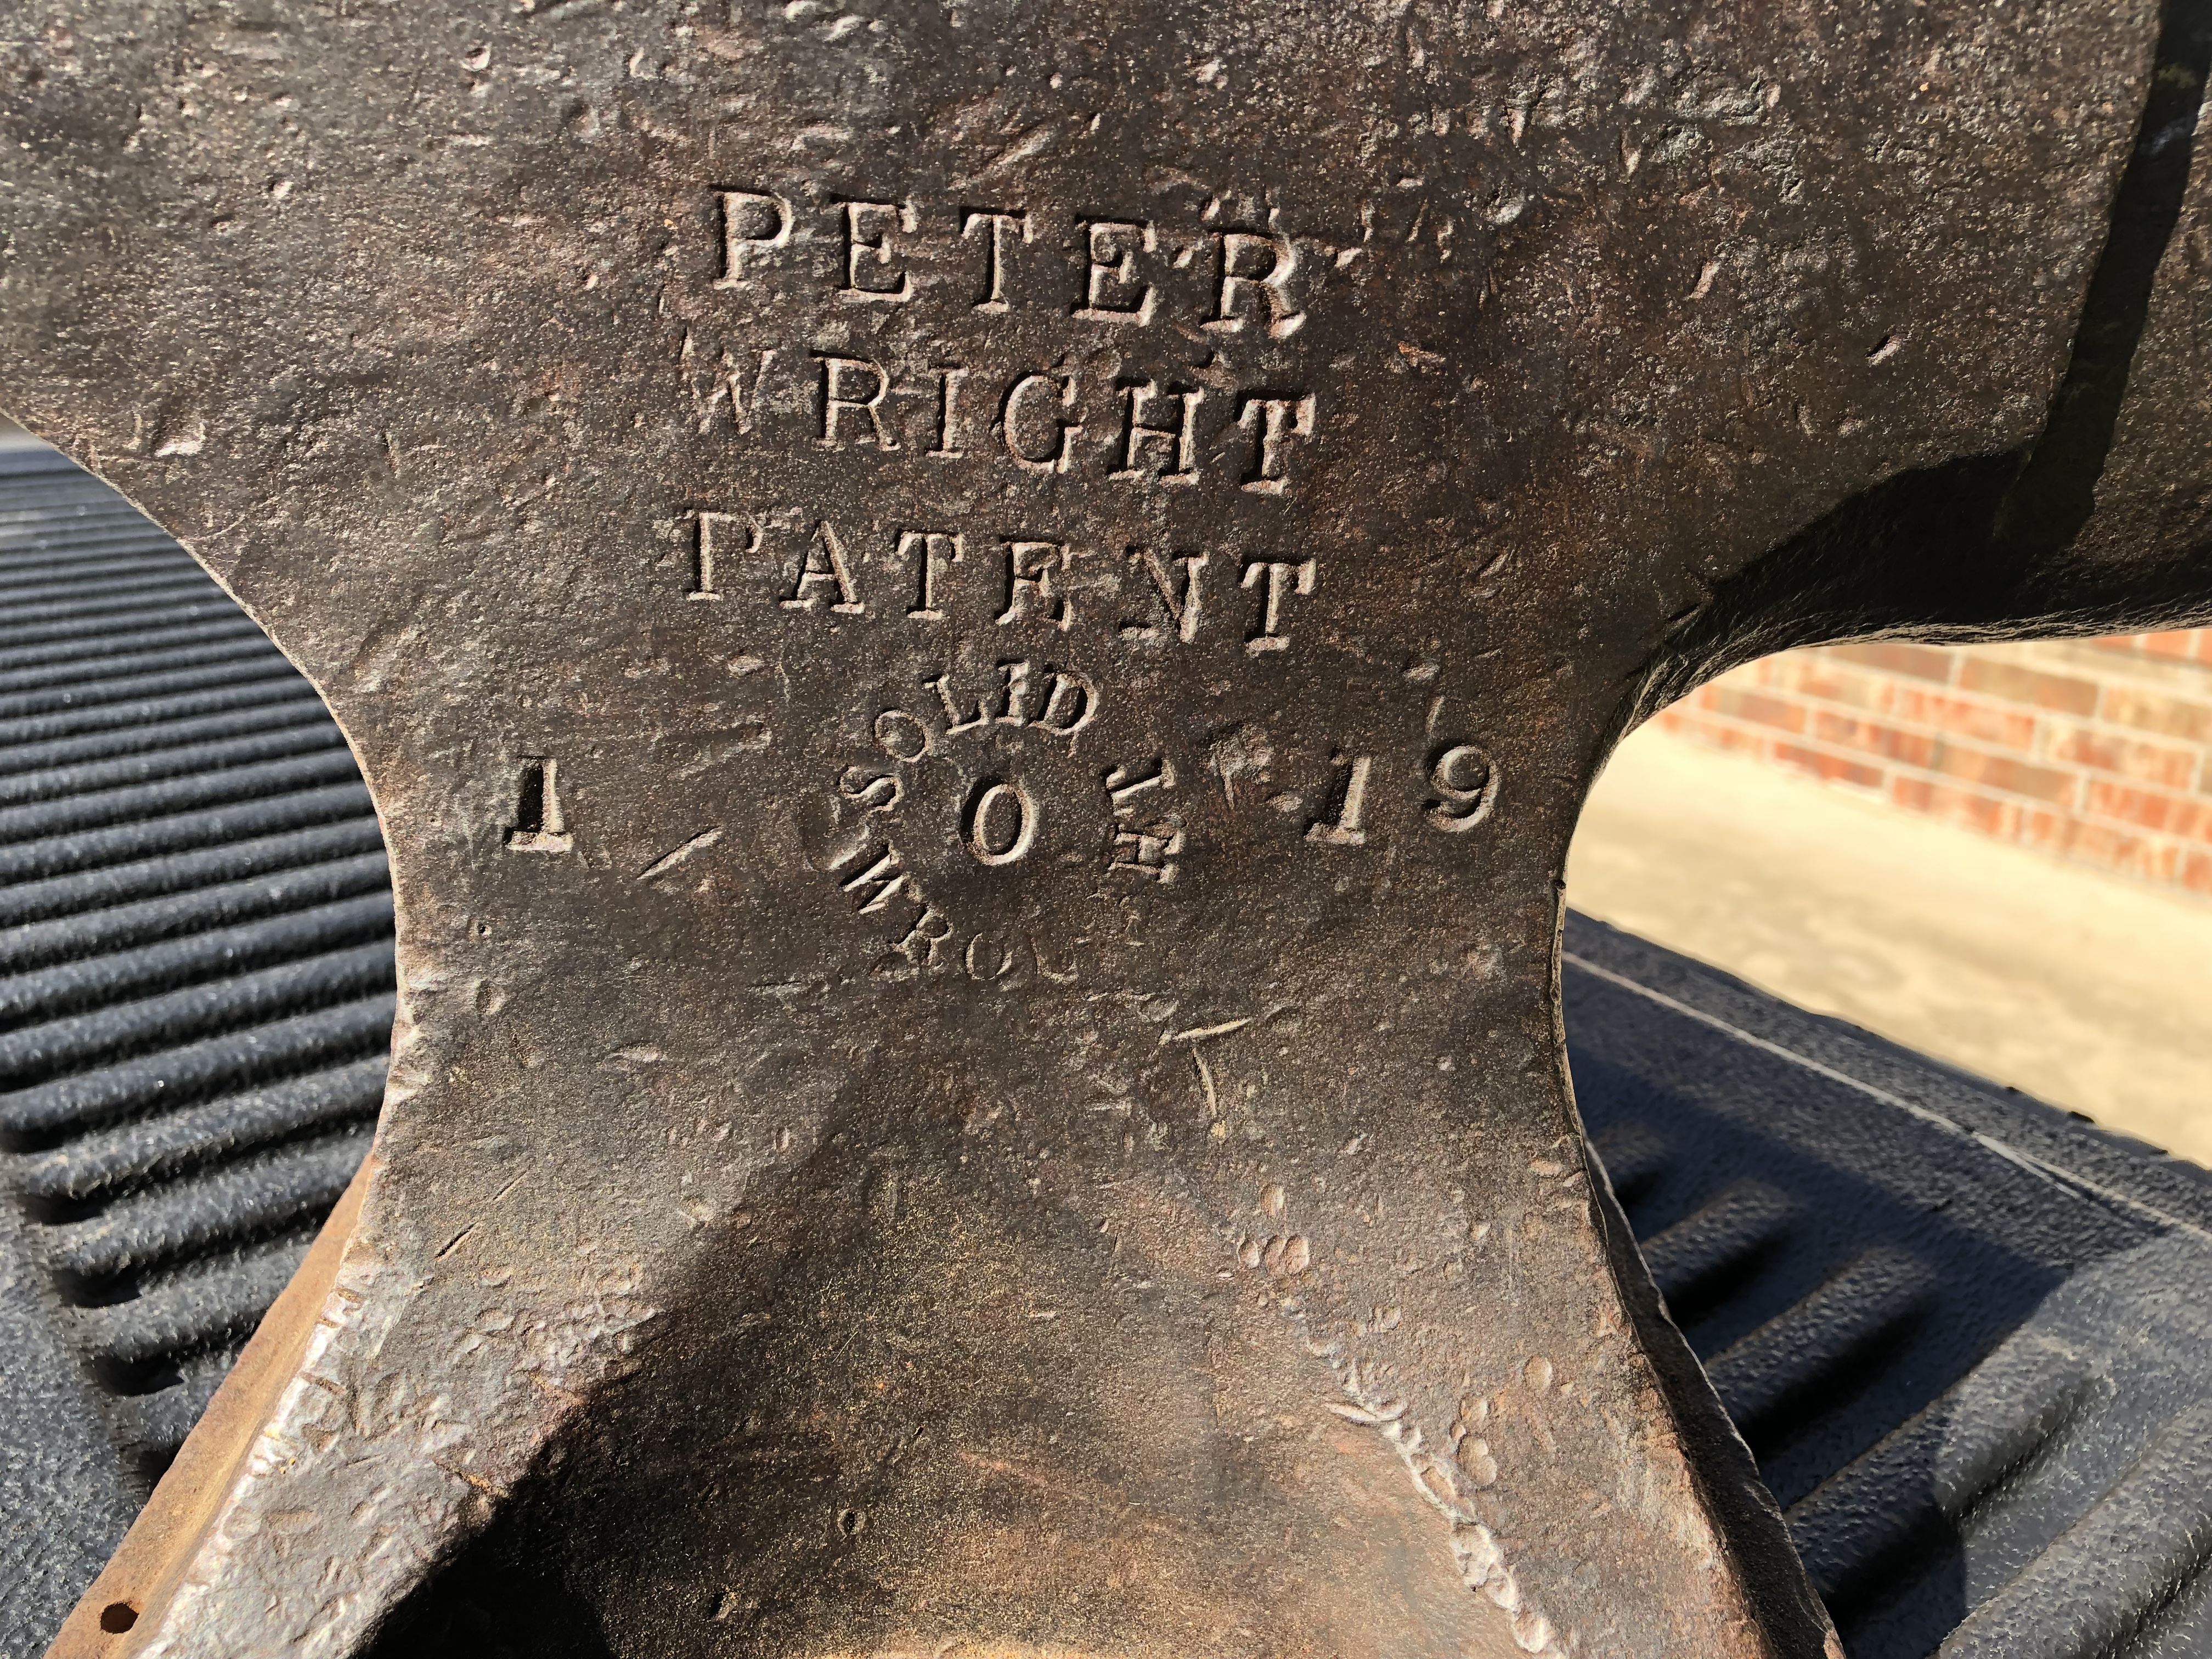 I found this Peter Wright anvil today. 